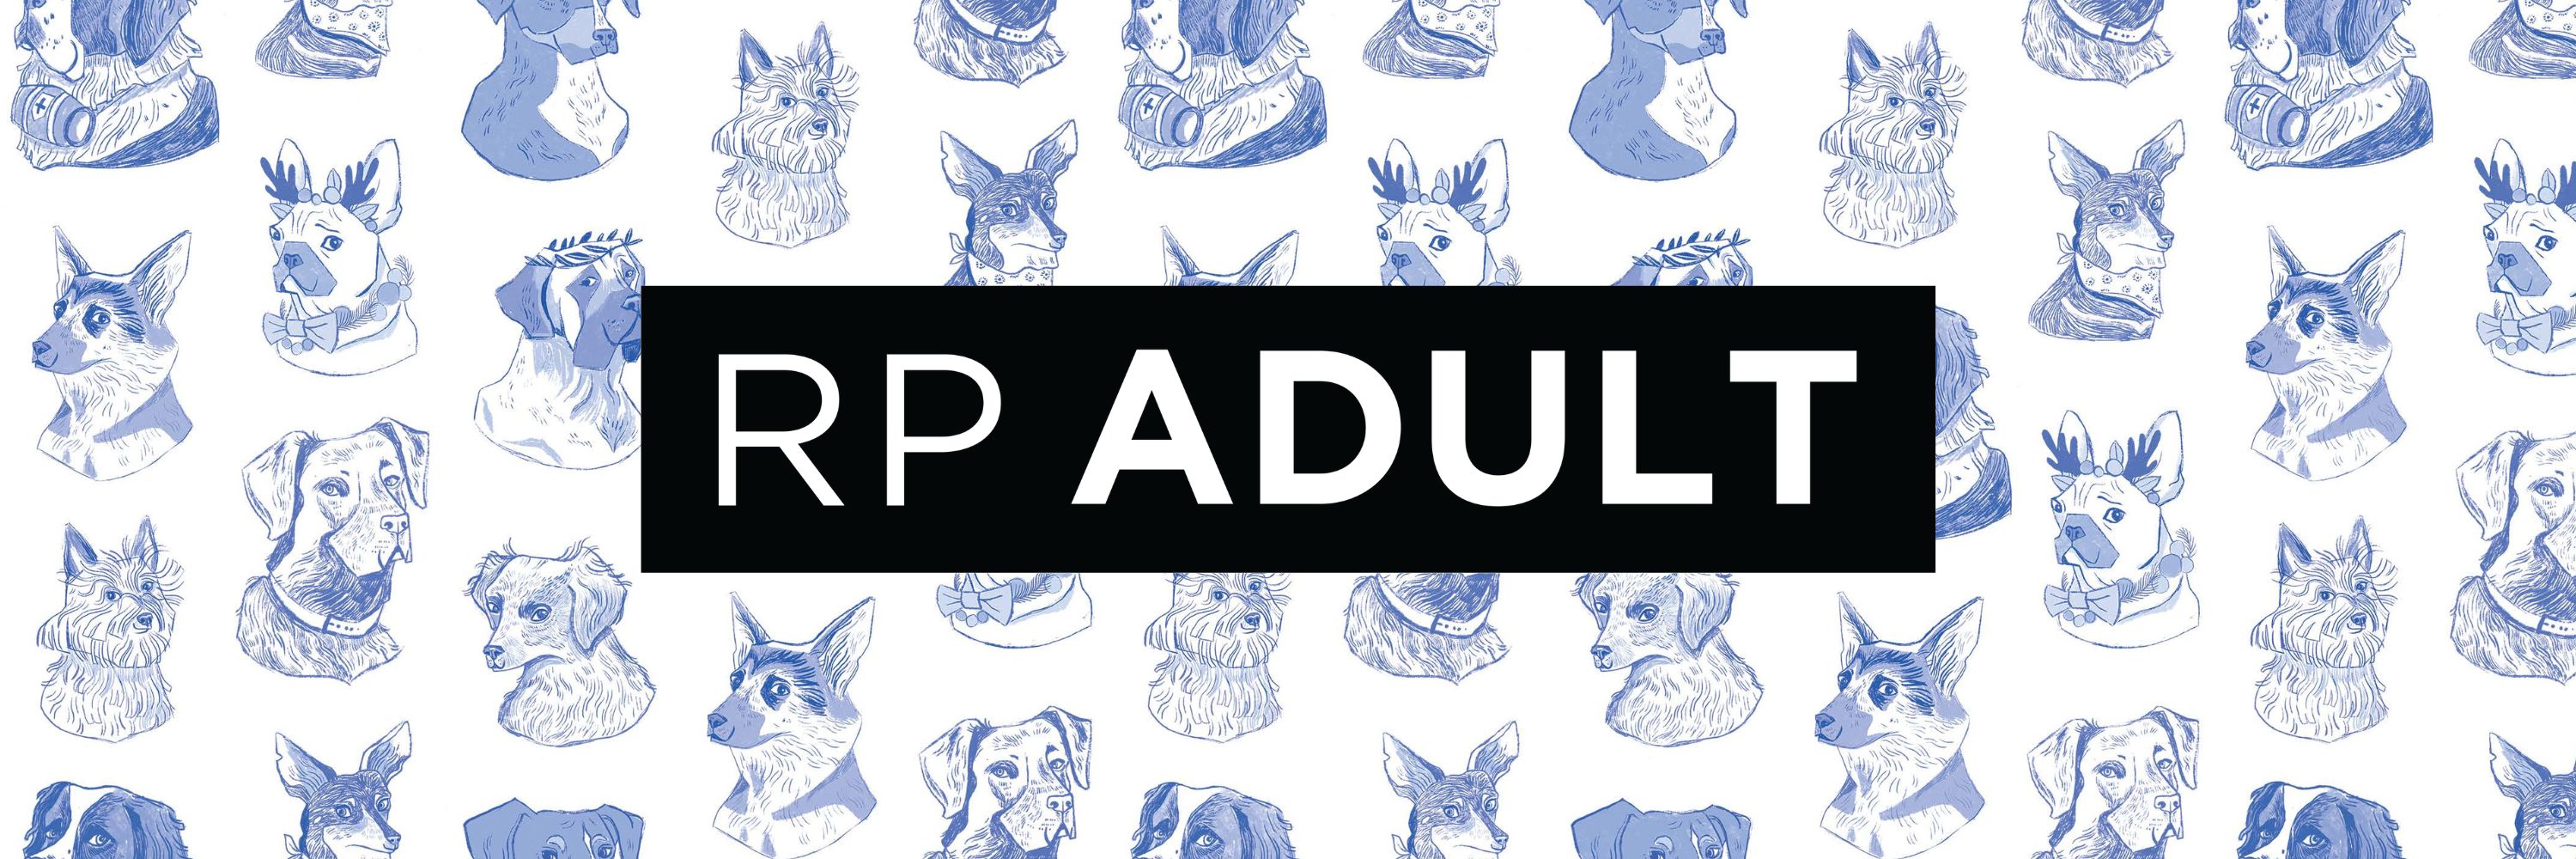 Designed banner reading "RP Adult" over illustrations of various dogs